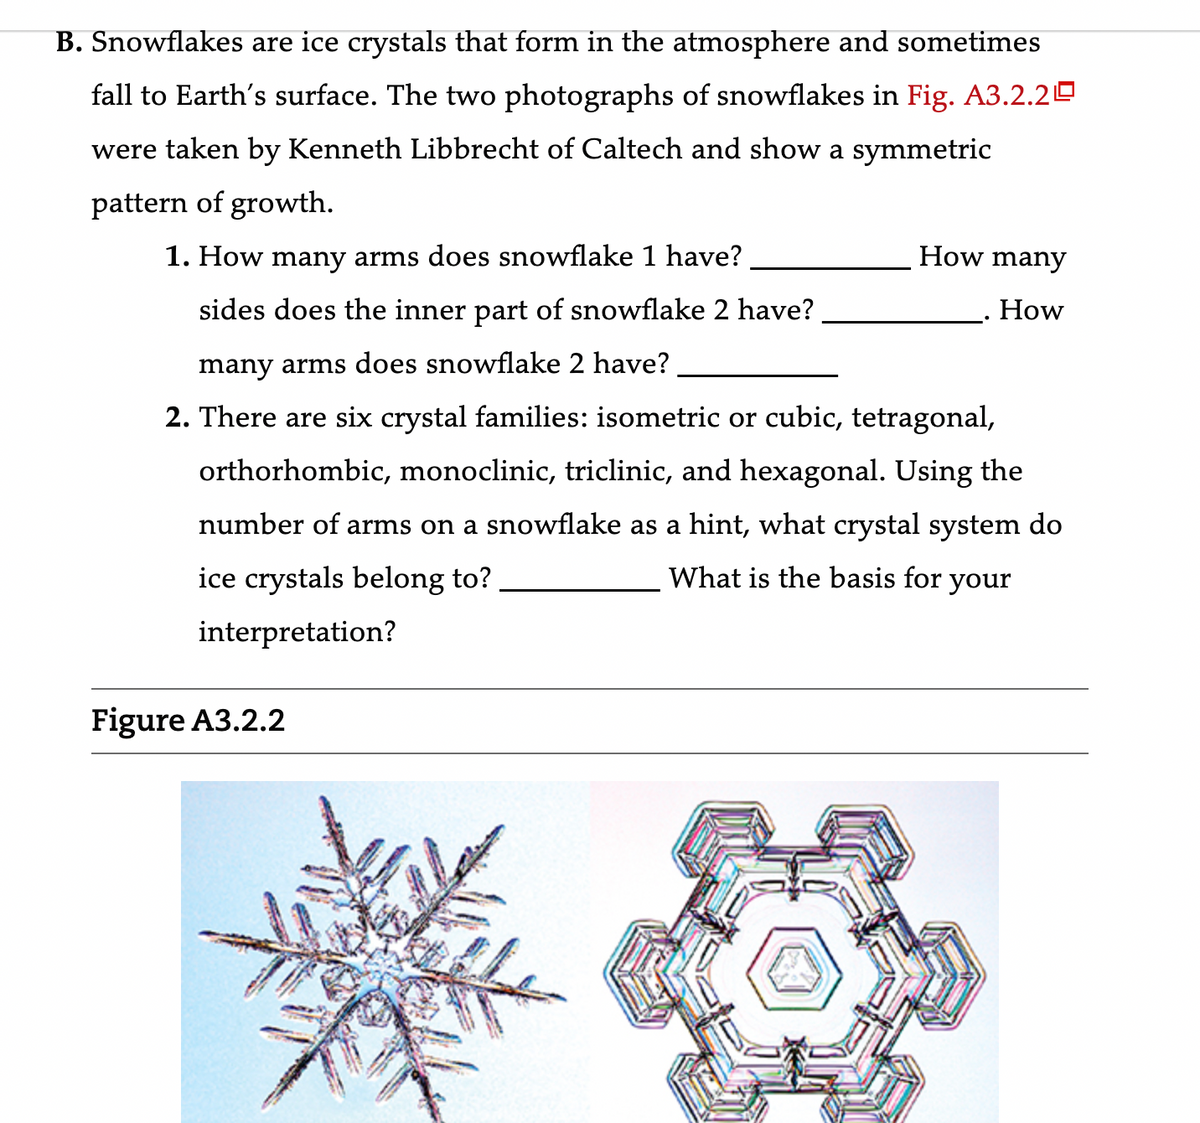 B. Snowflakes are ice crystals that form in the atmosphere and sometimes
fall to Earth's surface. The two photographs of snowflakes in Fig. A3.2.20
were taken by Kenneth Libbrecht of Caltech and show a symmetric
pattern of growth.
1. How many arms does snowflake 1 have?
sides does the inner part of snowflake 2 have?
many arms does snowflake 2 have?
2. There are six crystal families: isometric or cubic, tetragonal,
orthorhombic, monoclinic, triclinic, and hexagonal. Using the
number of arms on a snowflake as a hint, what crystal system do
ice crystals belong to?
What is the basis for your
interpretation?
How many
How
Figure A3.2.2